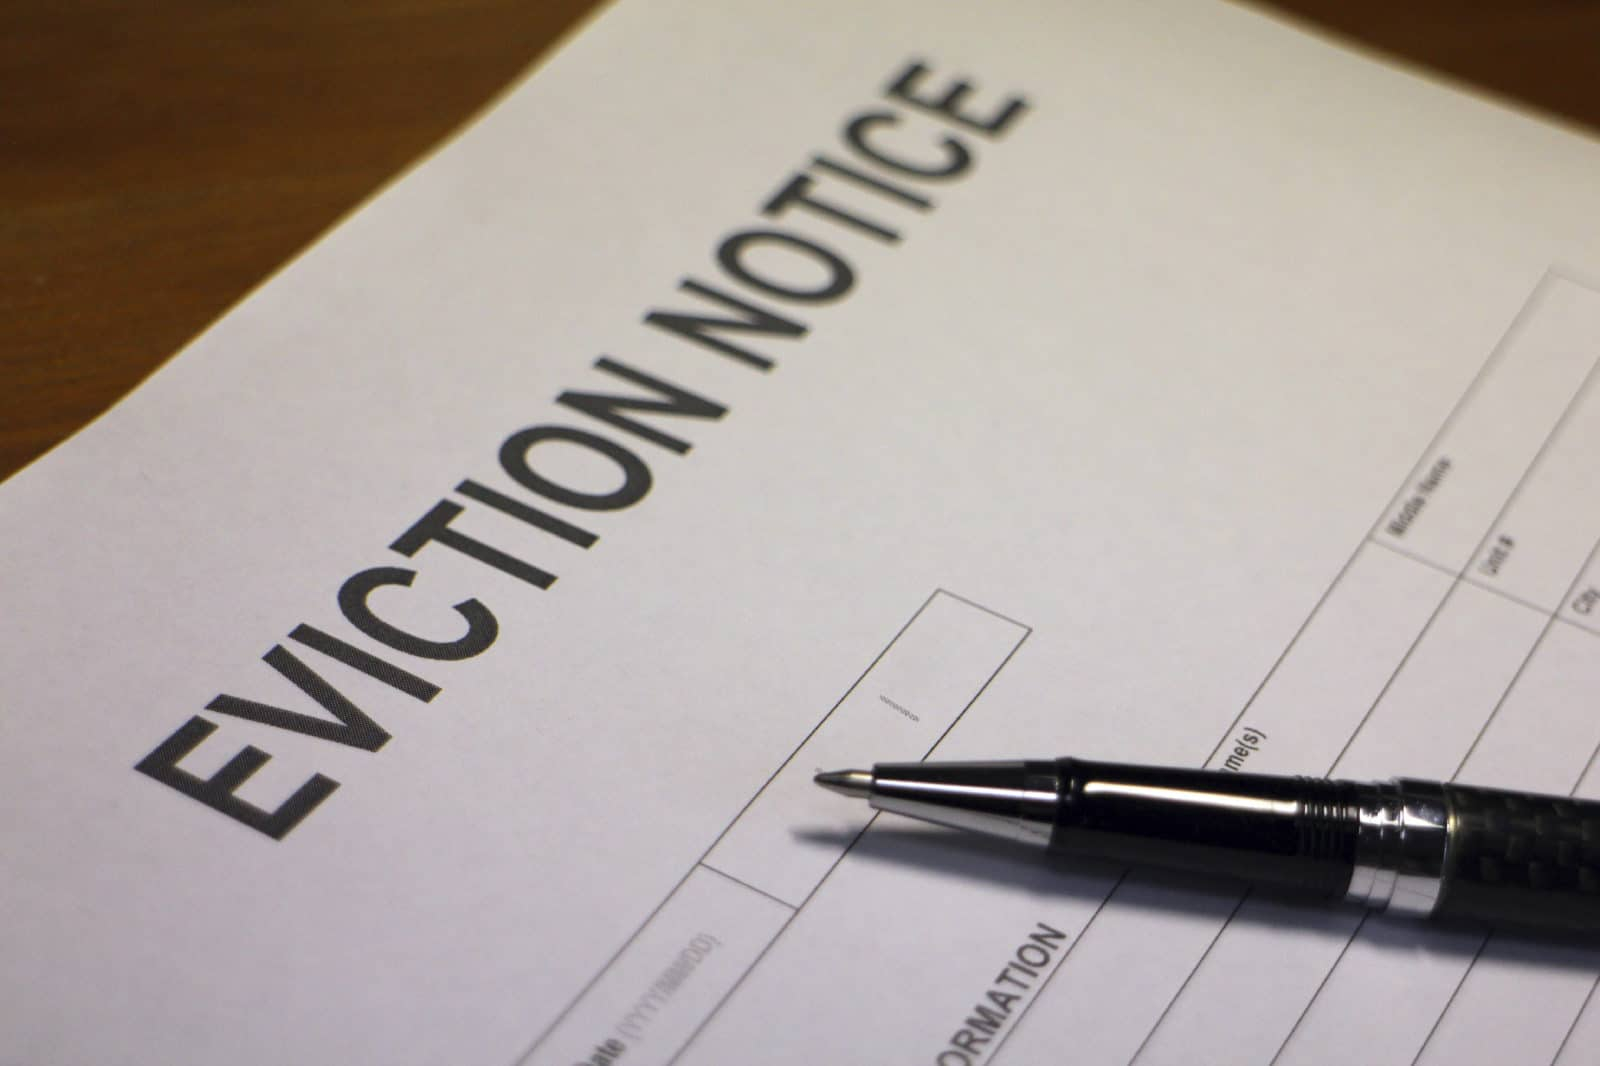 Eviction Without Tenancy Agreement If My Private Landlord Asks Me To Leave What Are My Rights